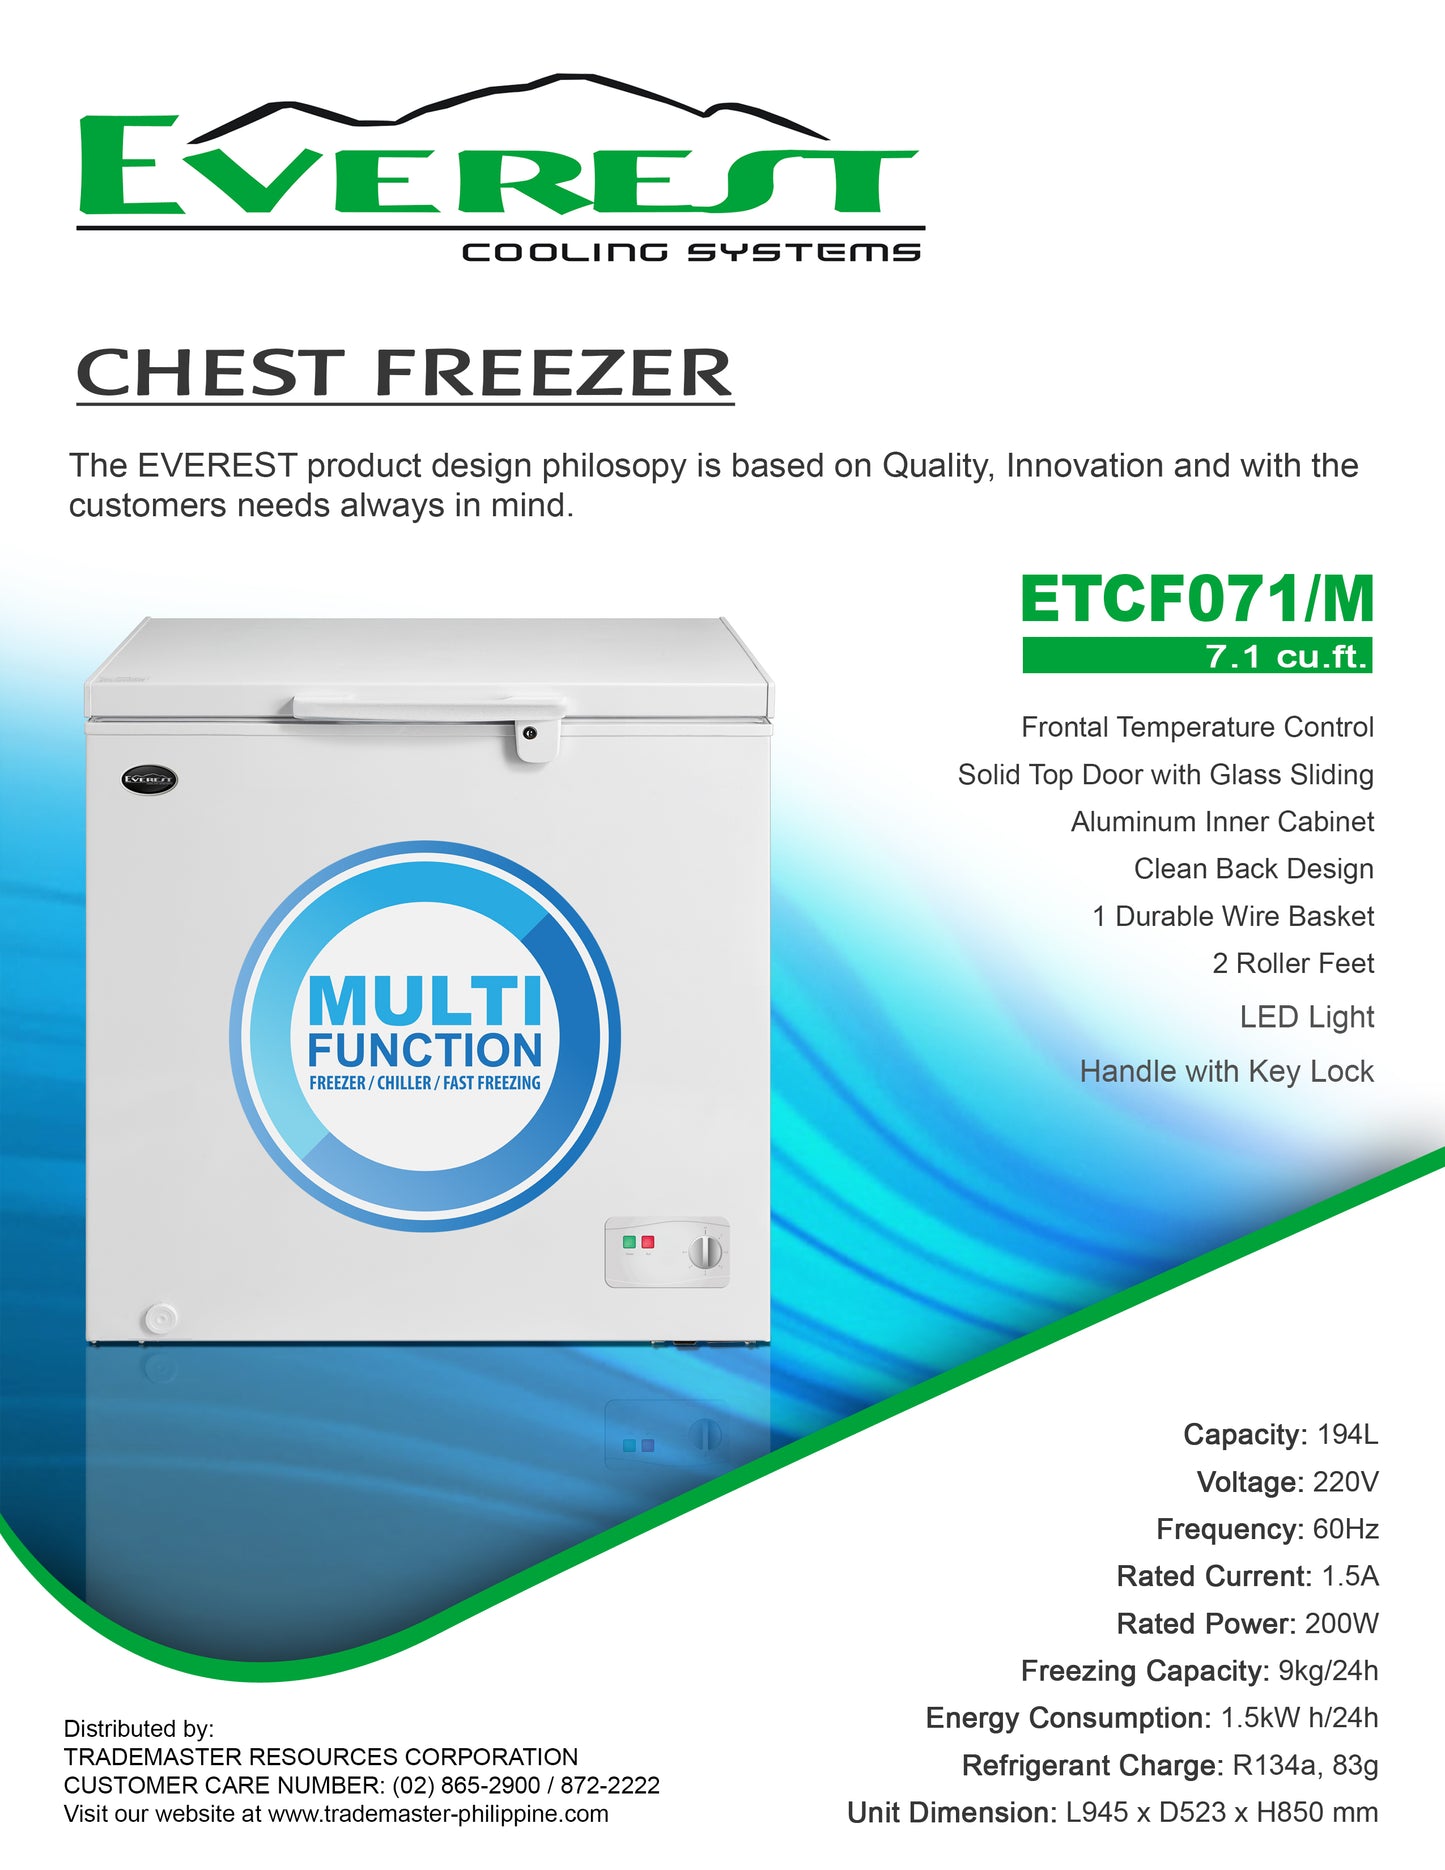 7.1 cu.ft. Chest Freezer | multi function - freezer/chiller/fast freezing | solid top door with glass sliding | aluminum inner cabinet | key lock